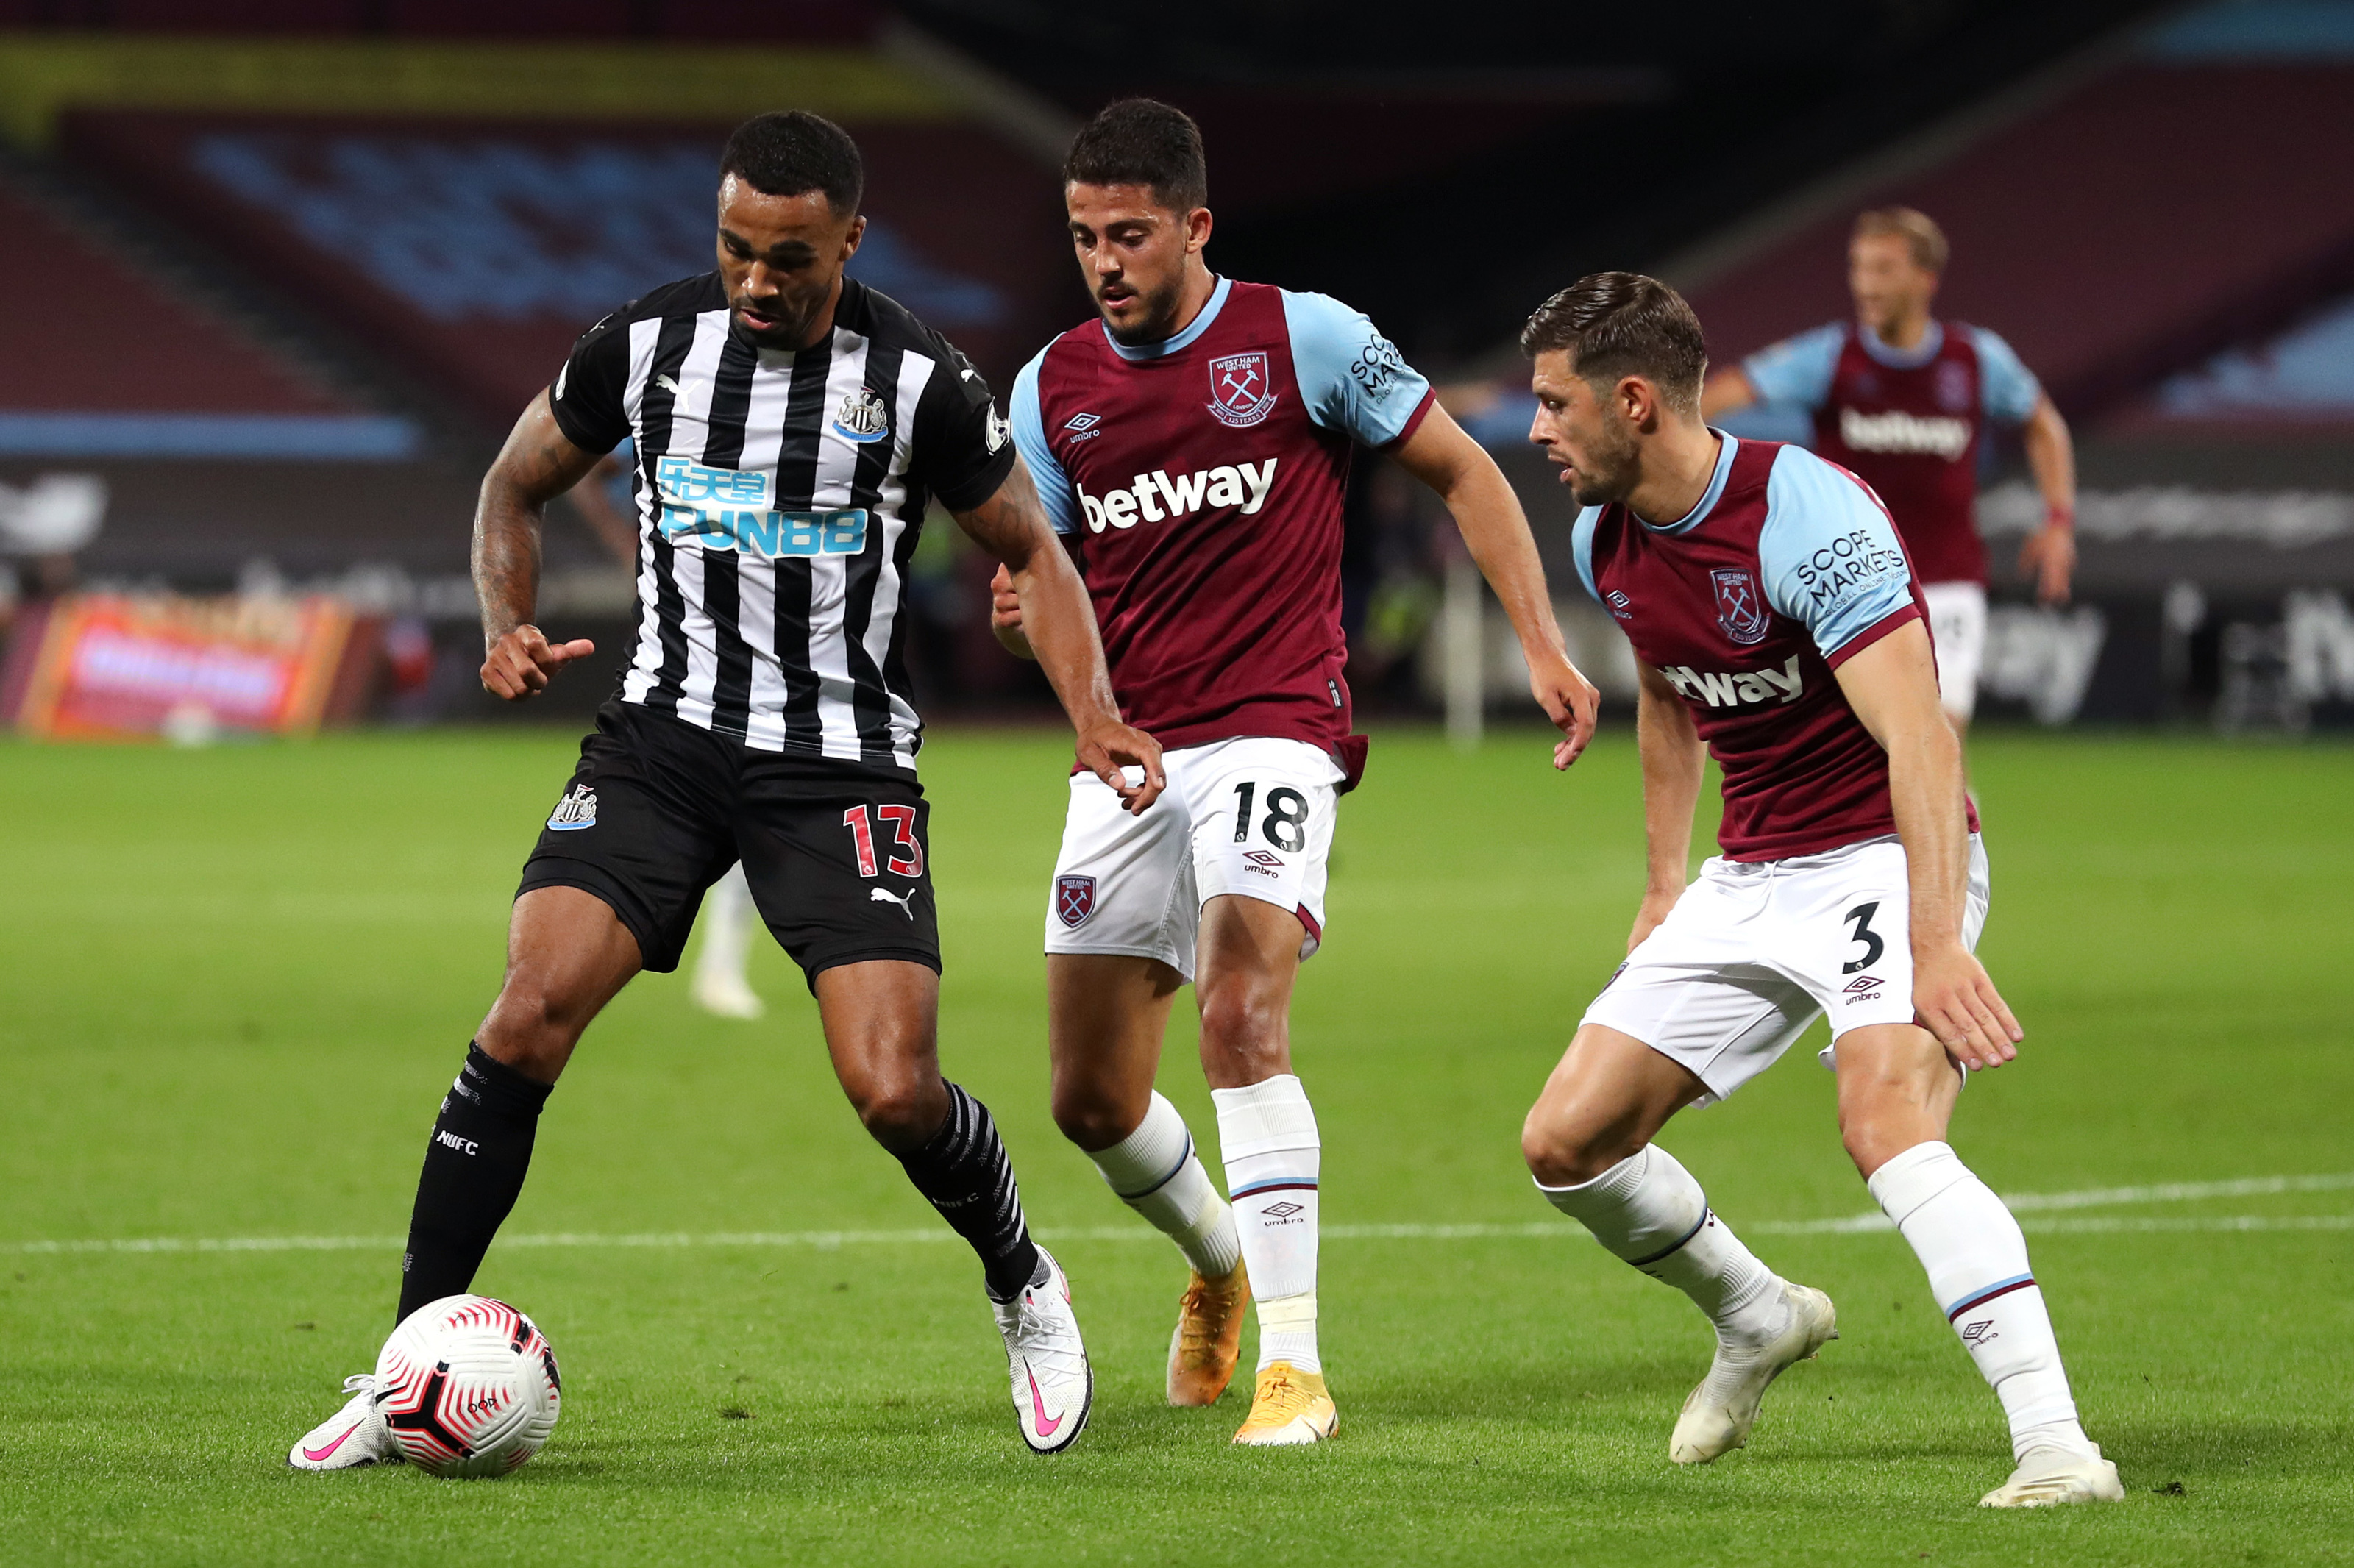 Bookies give Newcastle United favorable odds to shock West Ham United